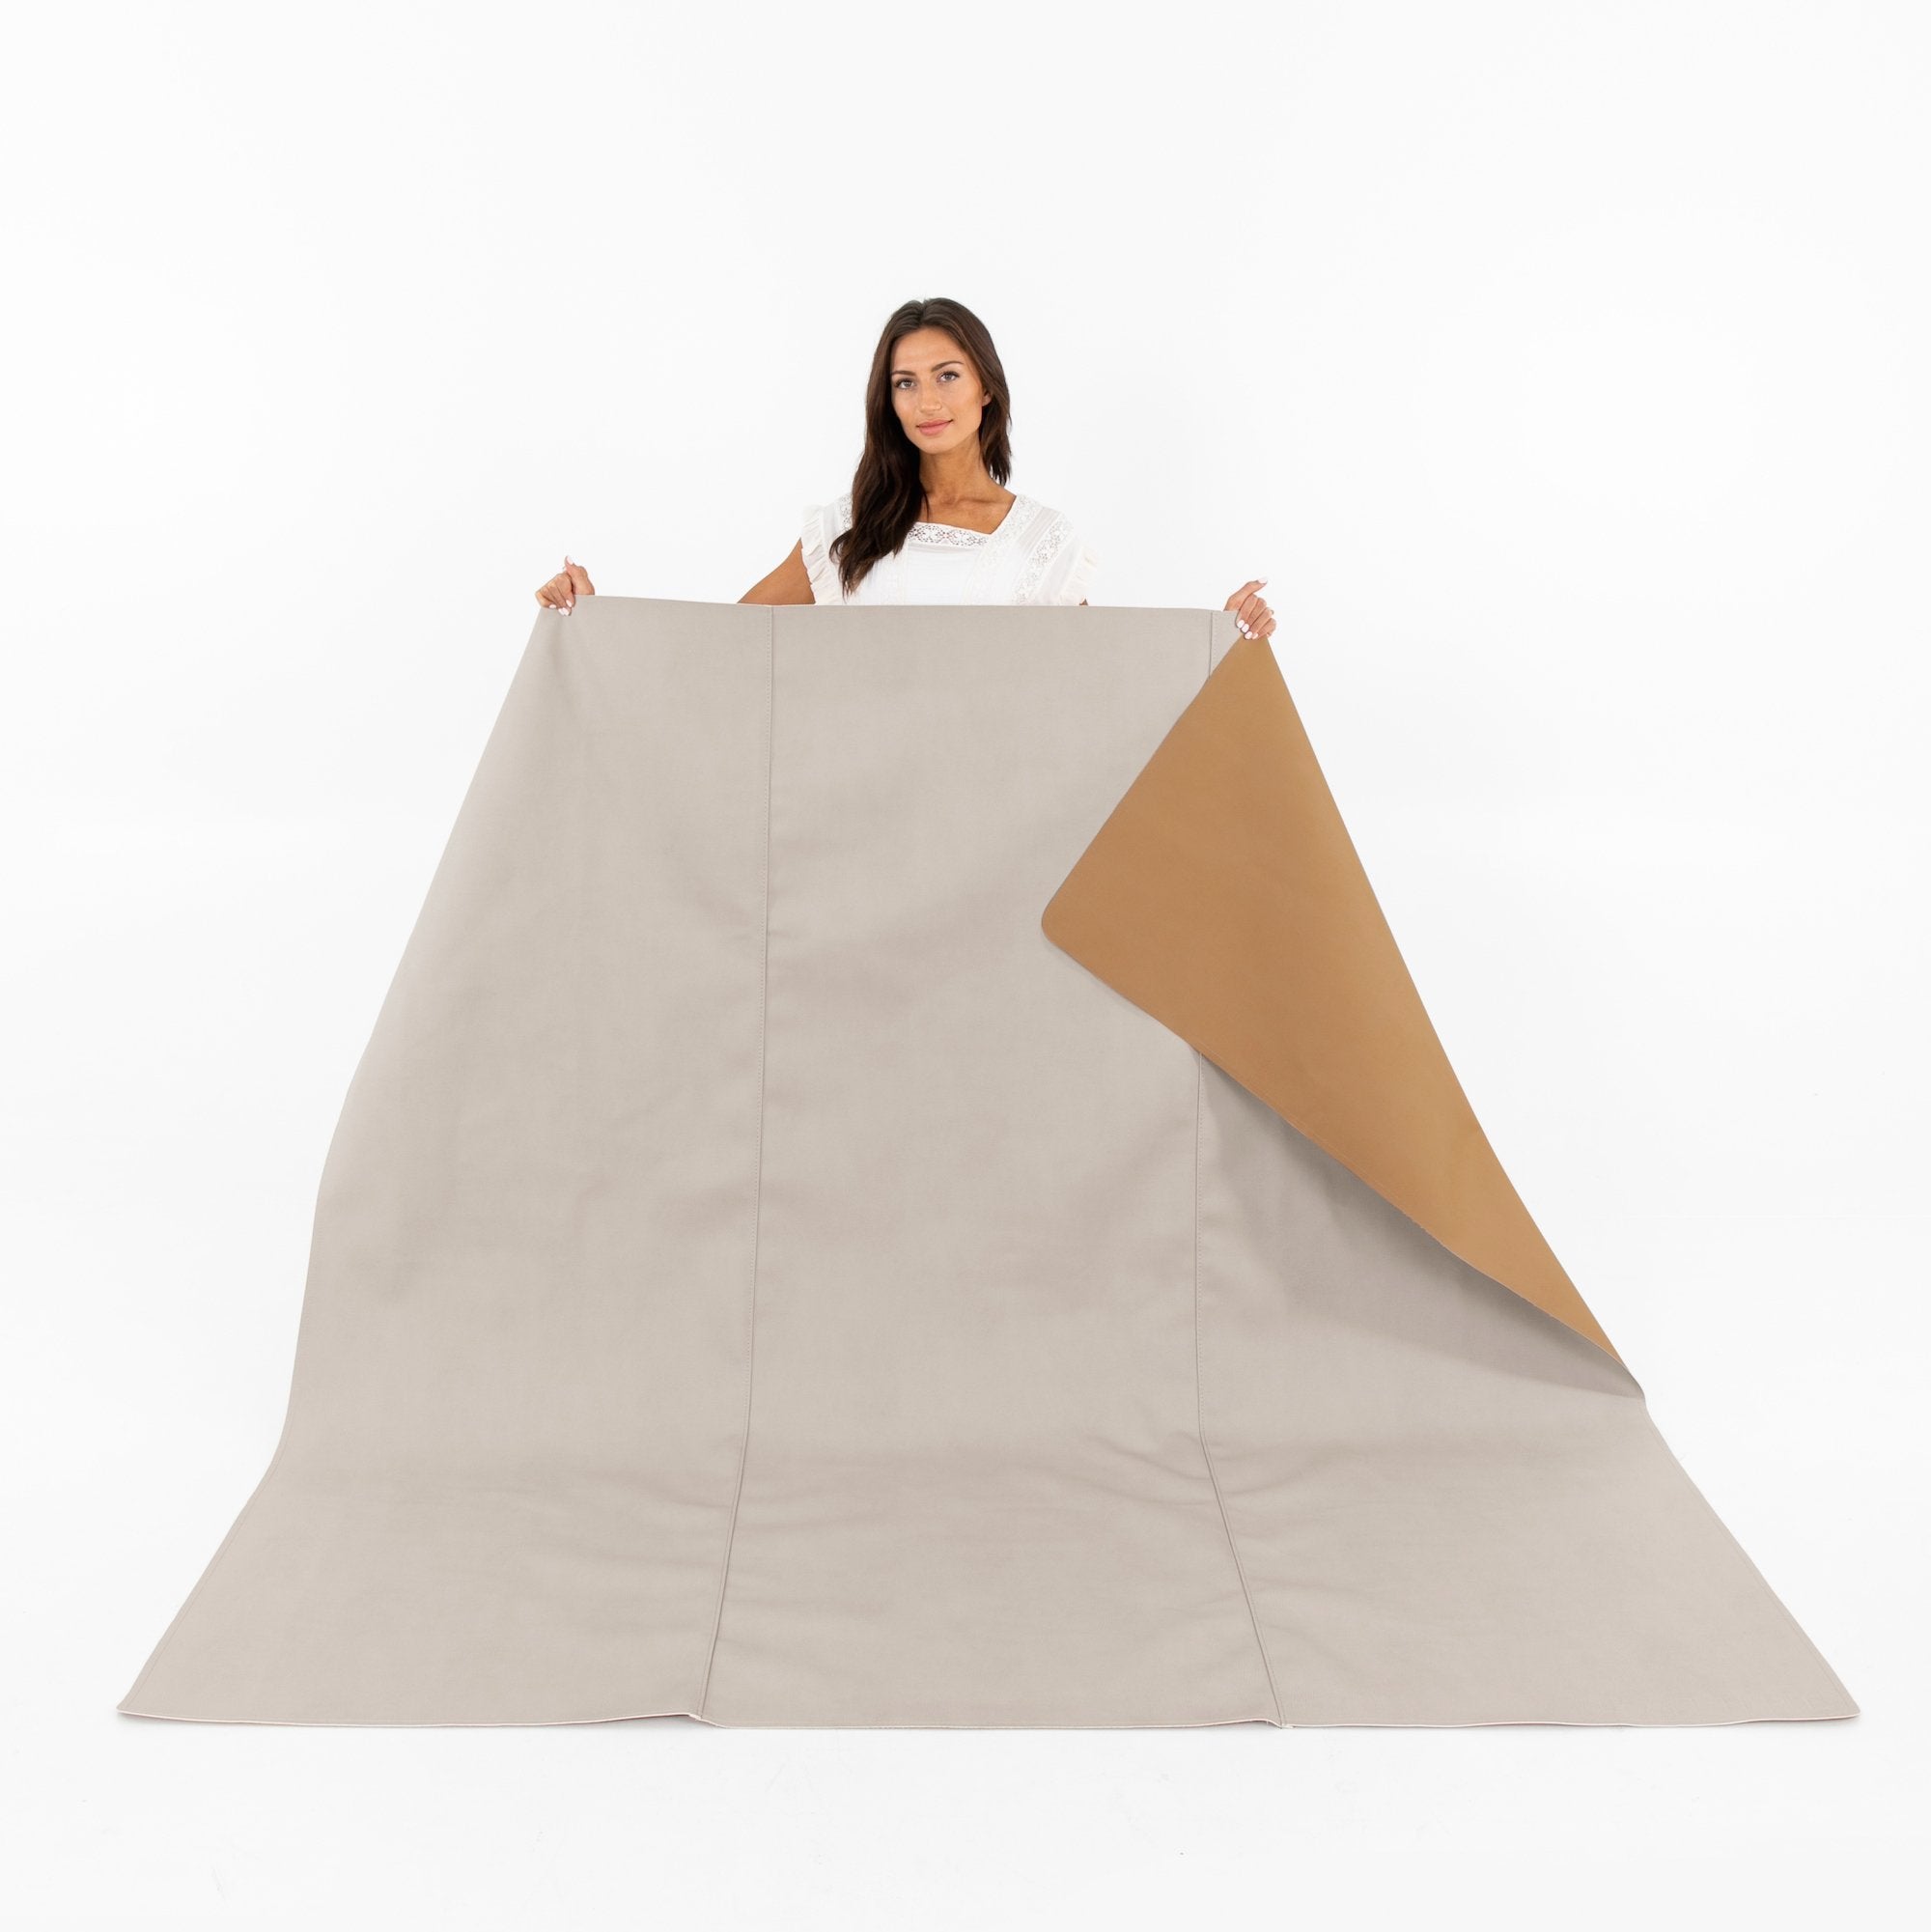 Fog/Camel (on sale) / Square@Woman holding the Fog/Camel Maxi Square Mat 